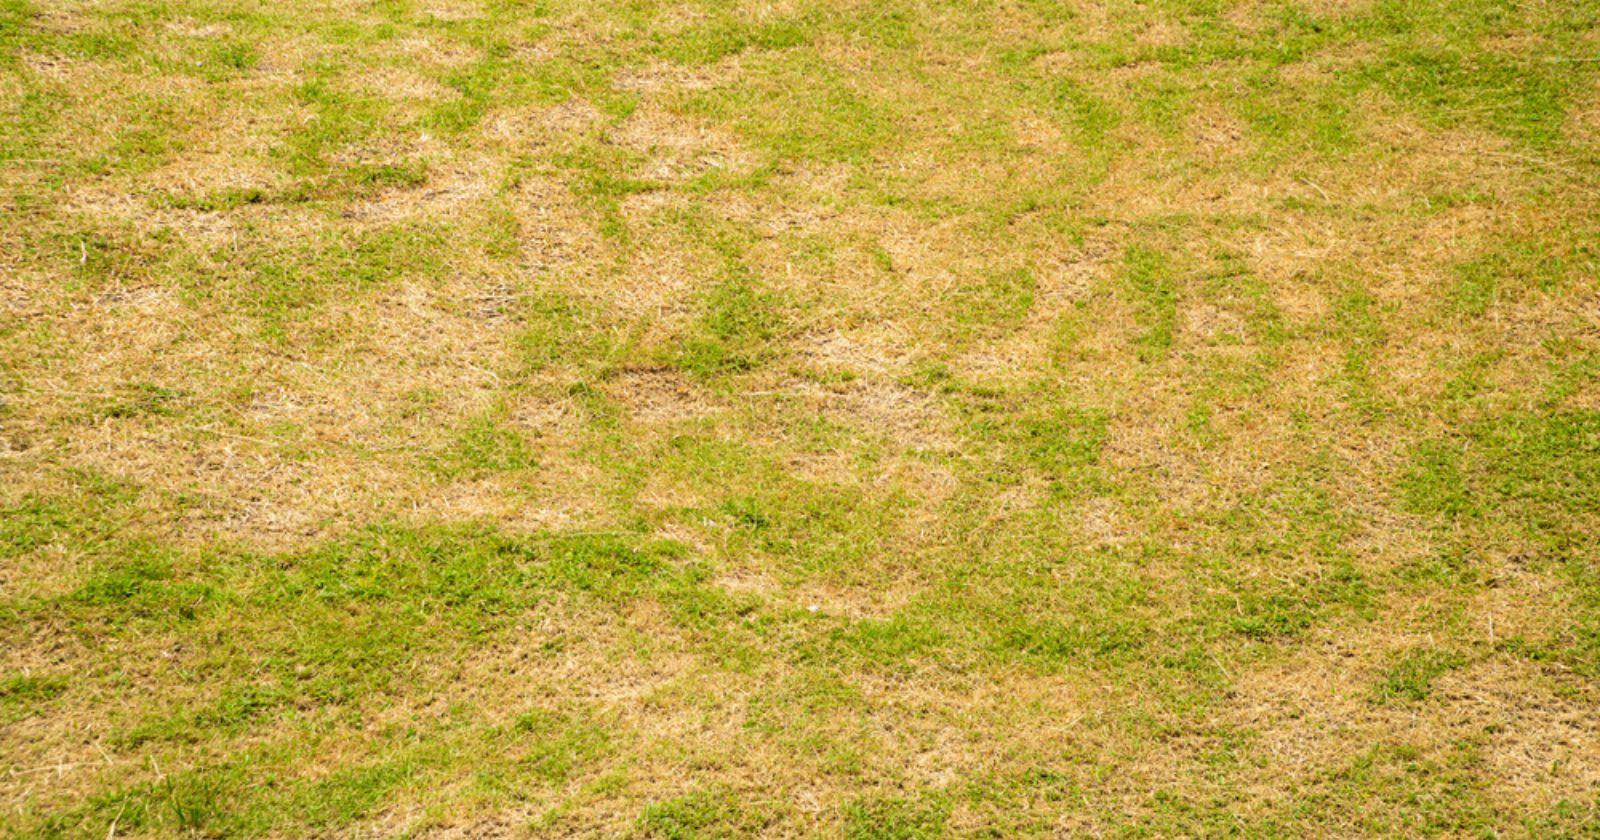 Yellow lawn: 4 simple and natural tips to combat this phenomenon